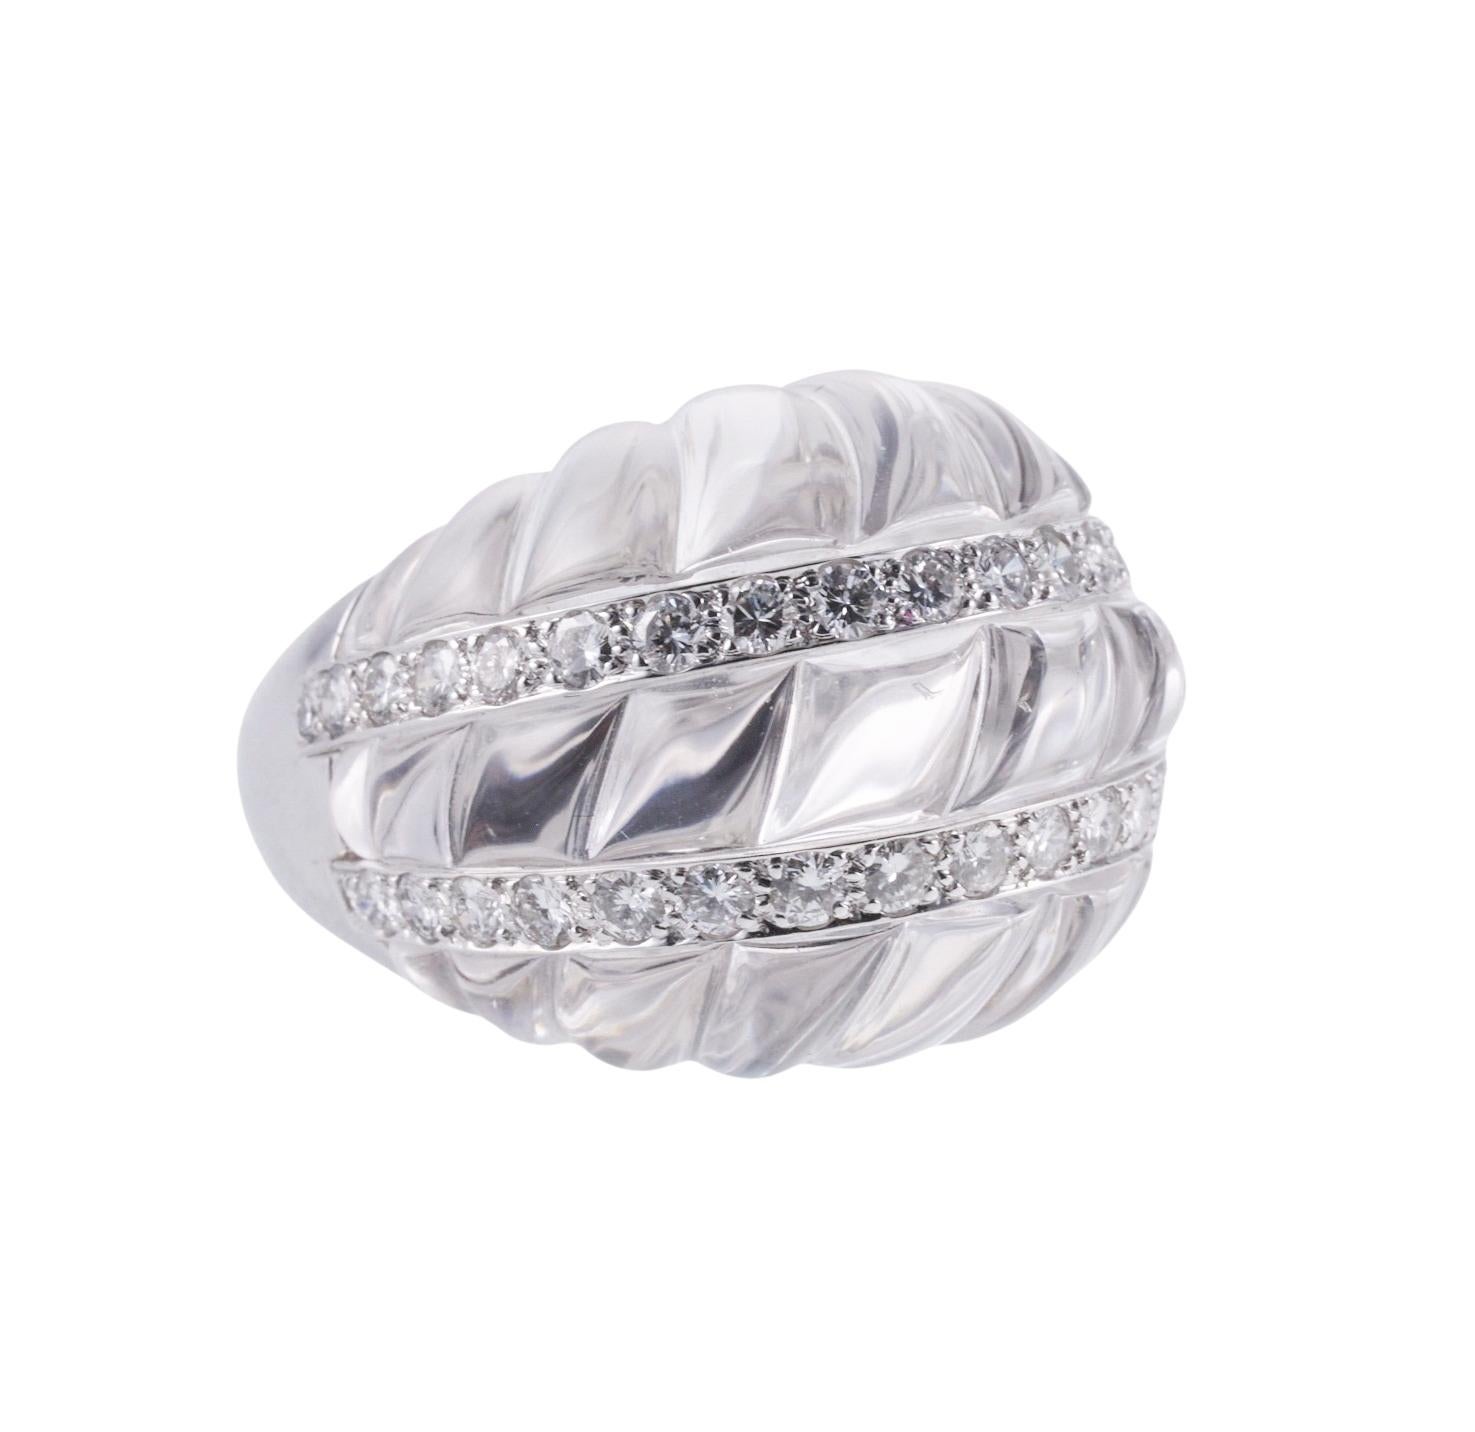 Iconic carved crystal cocktail ring by David Webb, set in platinum with 14k gold, featuring approx. 1.80ctw in H/VS-Si diamonds. Ring size 5.5, top is 23mm x 30mm. Comes with David Webb pouch. Marked Webb, Plat, 14k. Weight of the piece - 33.9